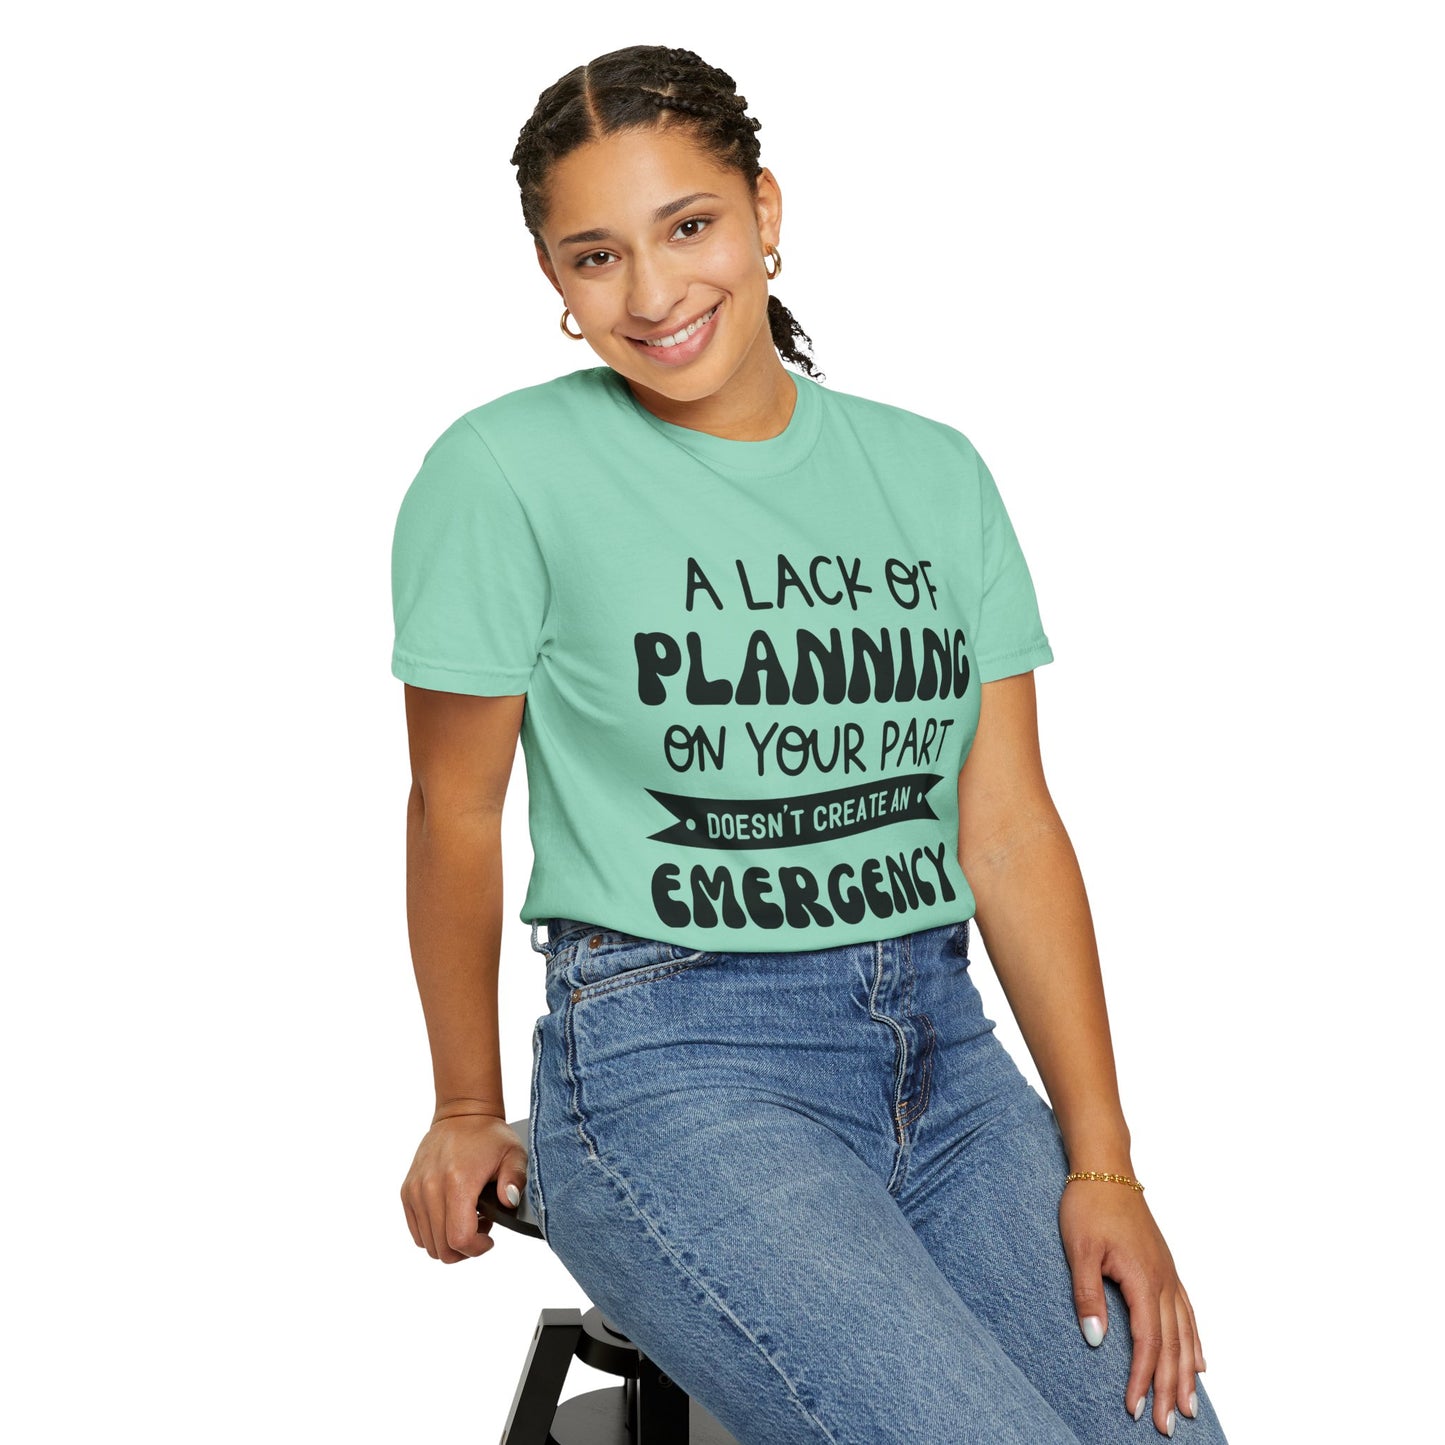 Lack of planning on your part - Unisex Garment-Dyed T-shirt